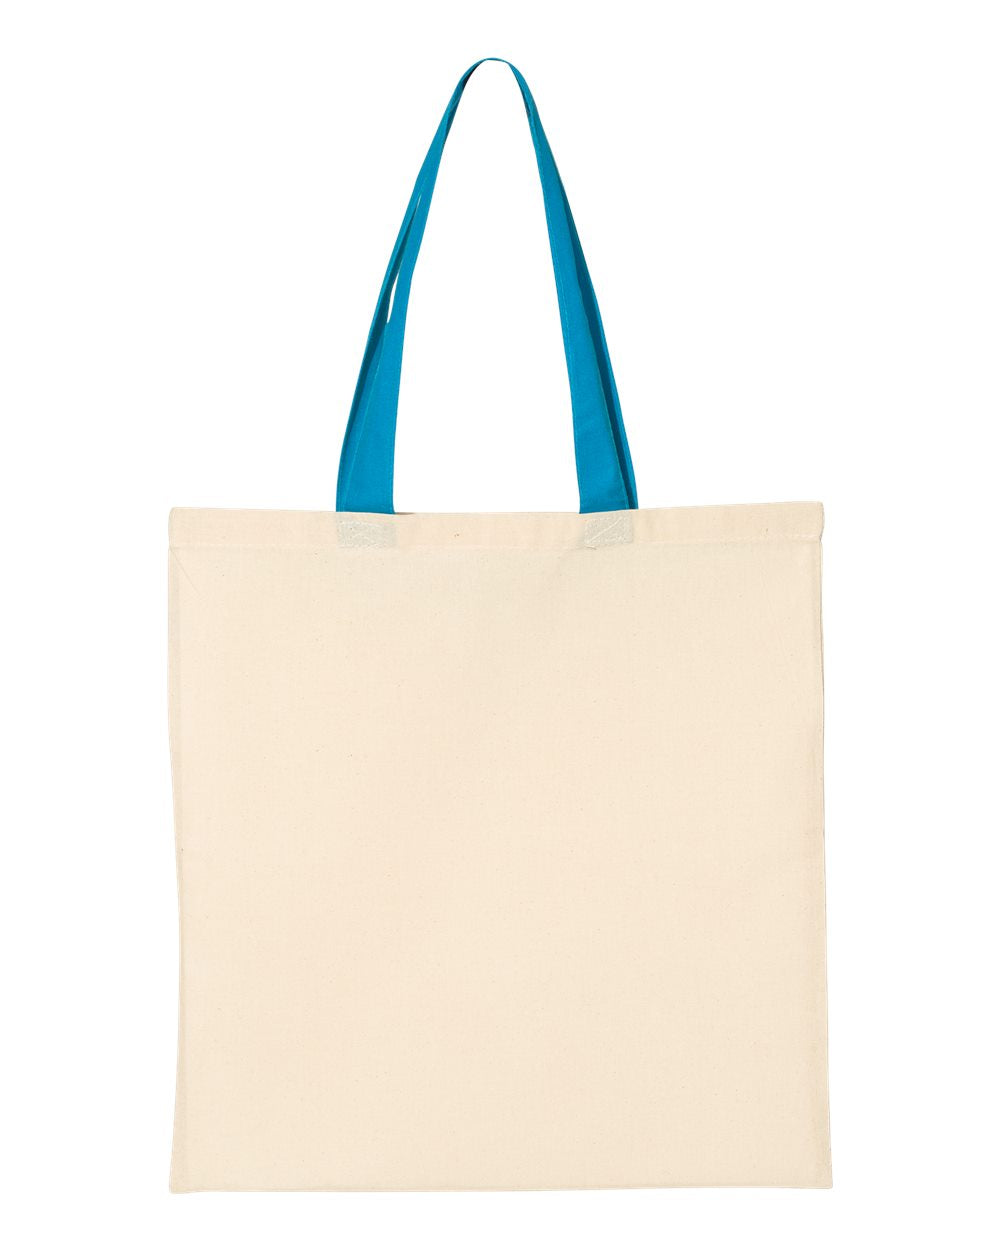 Q-Tees Economical Tote with Contrast-Color Handles